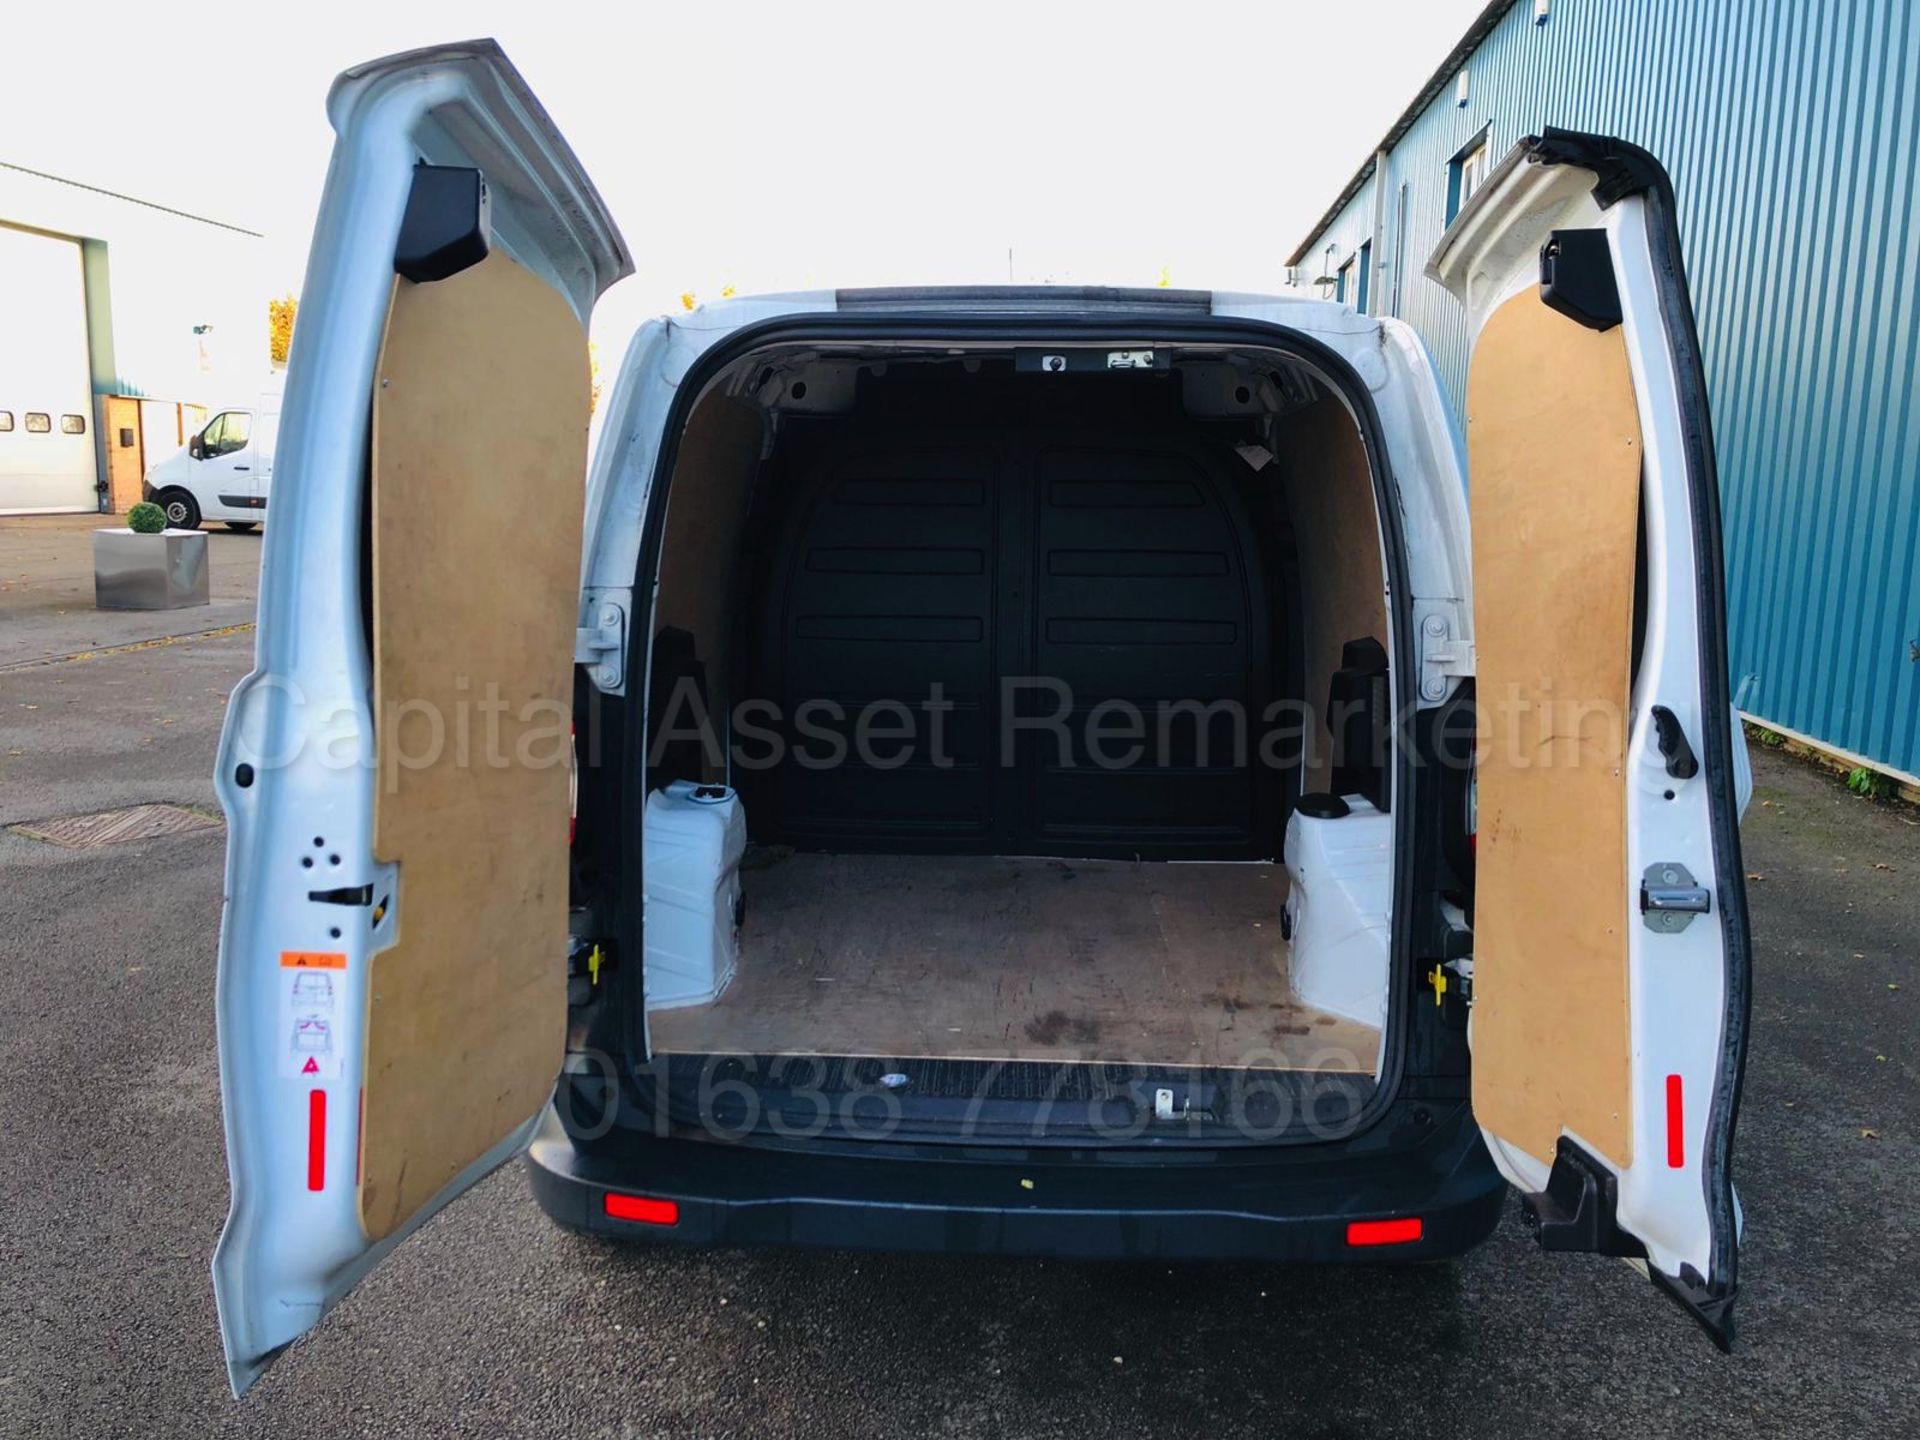 FORD TRANSIT COURIER 'PANEL VAN' *BASE EDITION* (2017) '1.5 TDCI - 75 BHP - 5 SPEED' (1 OWNER) - Image 15 of 25